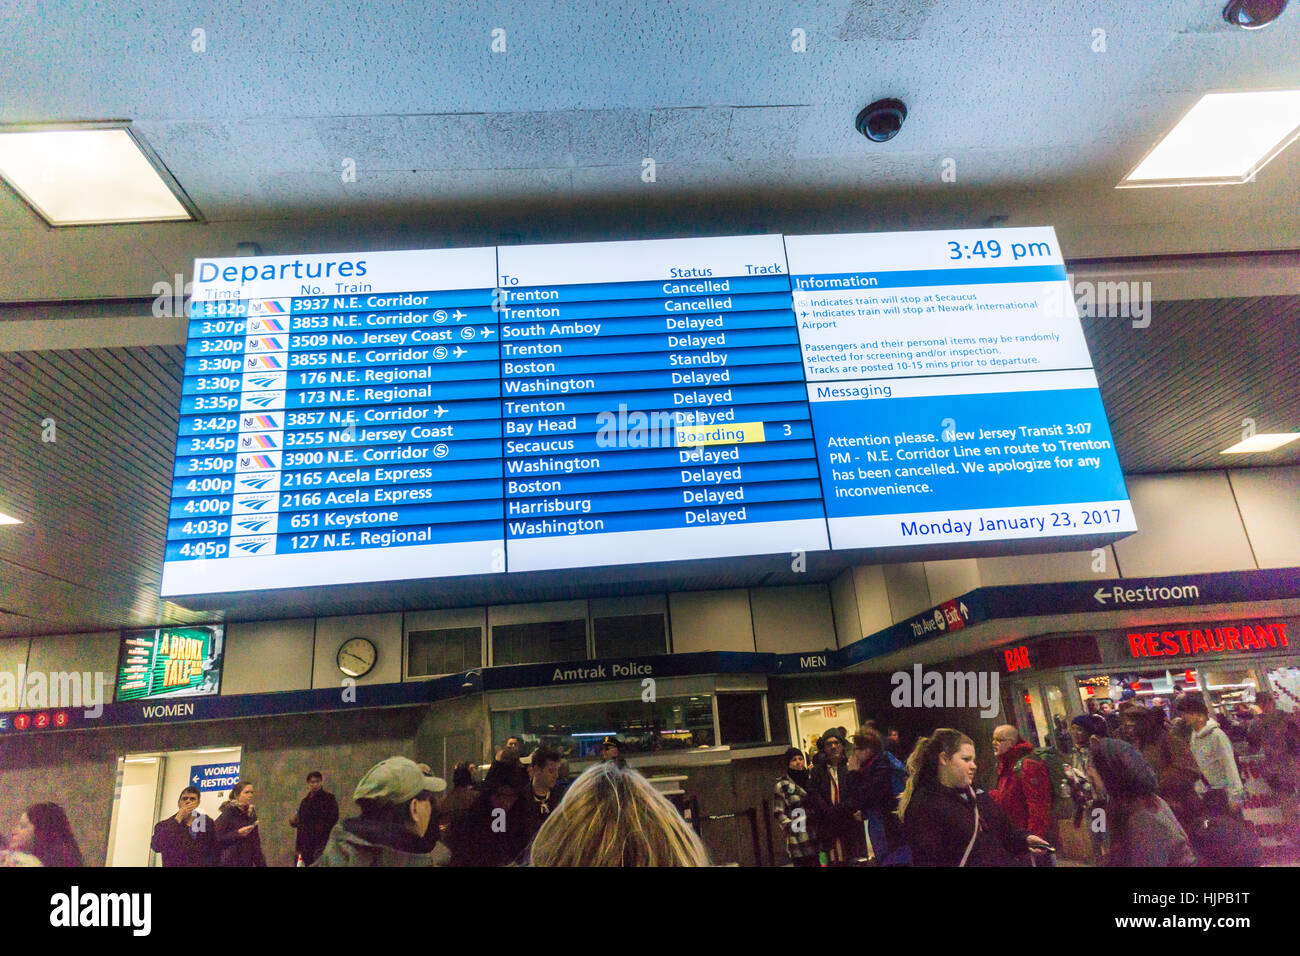 A digital Amtrak and NJ Transit departure board in Penn Station in New York on Monday, January 23, 2017 shows train service on Amtrak and NJ Transit has been severely disrupted with many trains cancelled because of the N'oreaster. (© Richard B. Levine) Stock Photo